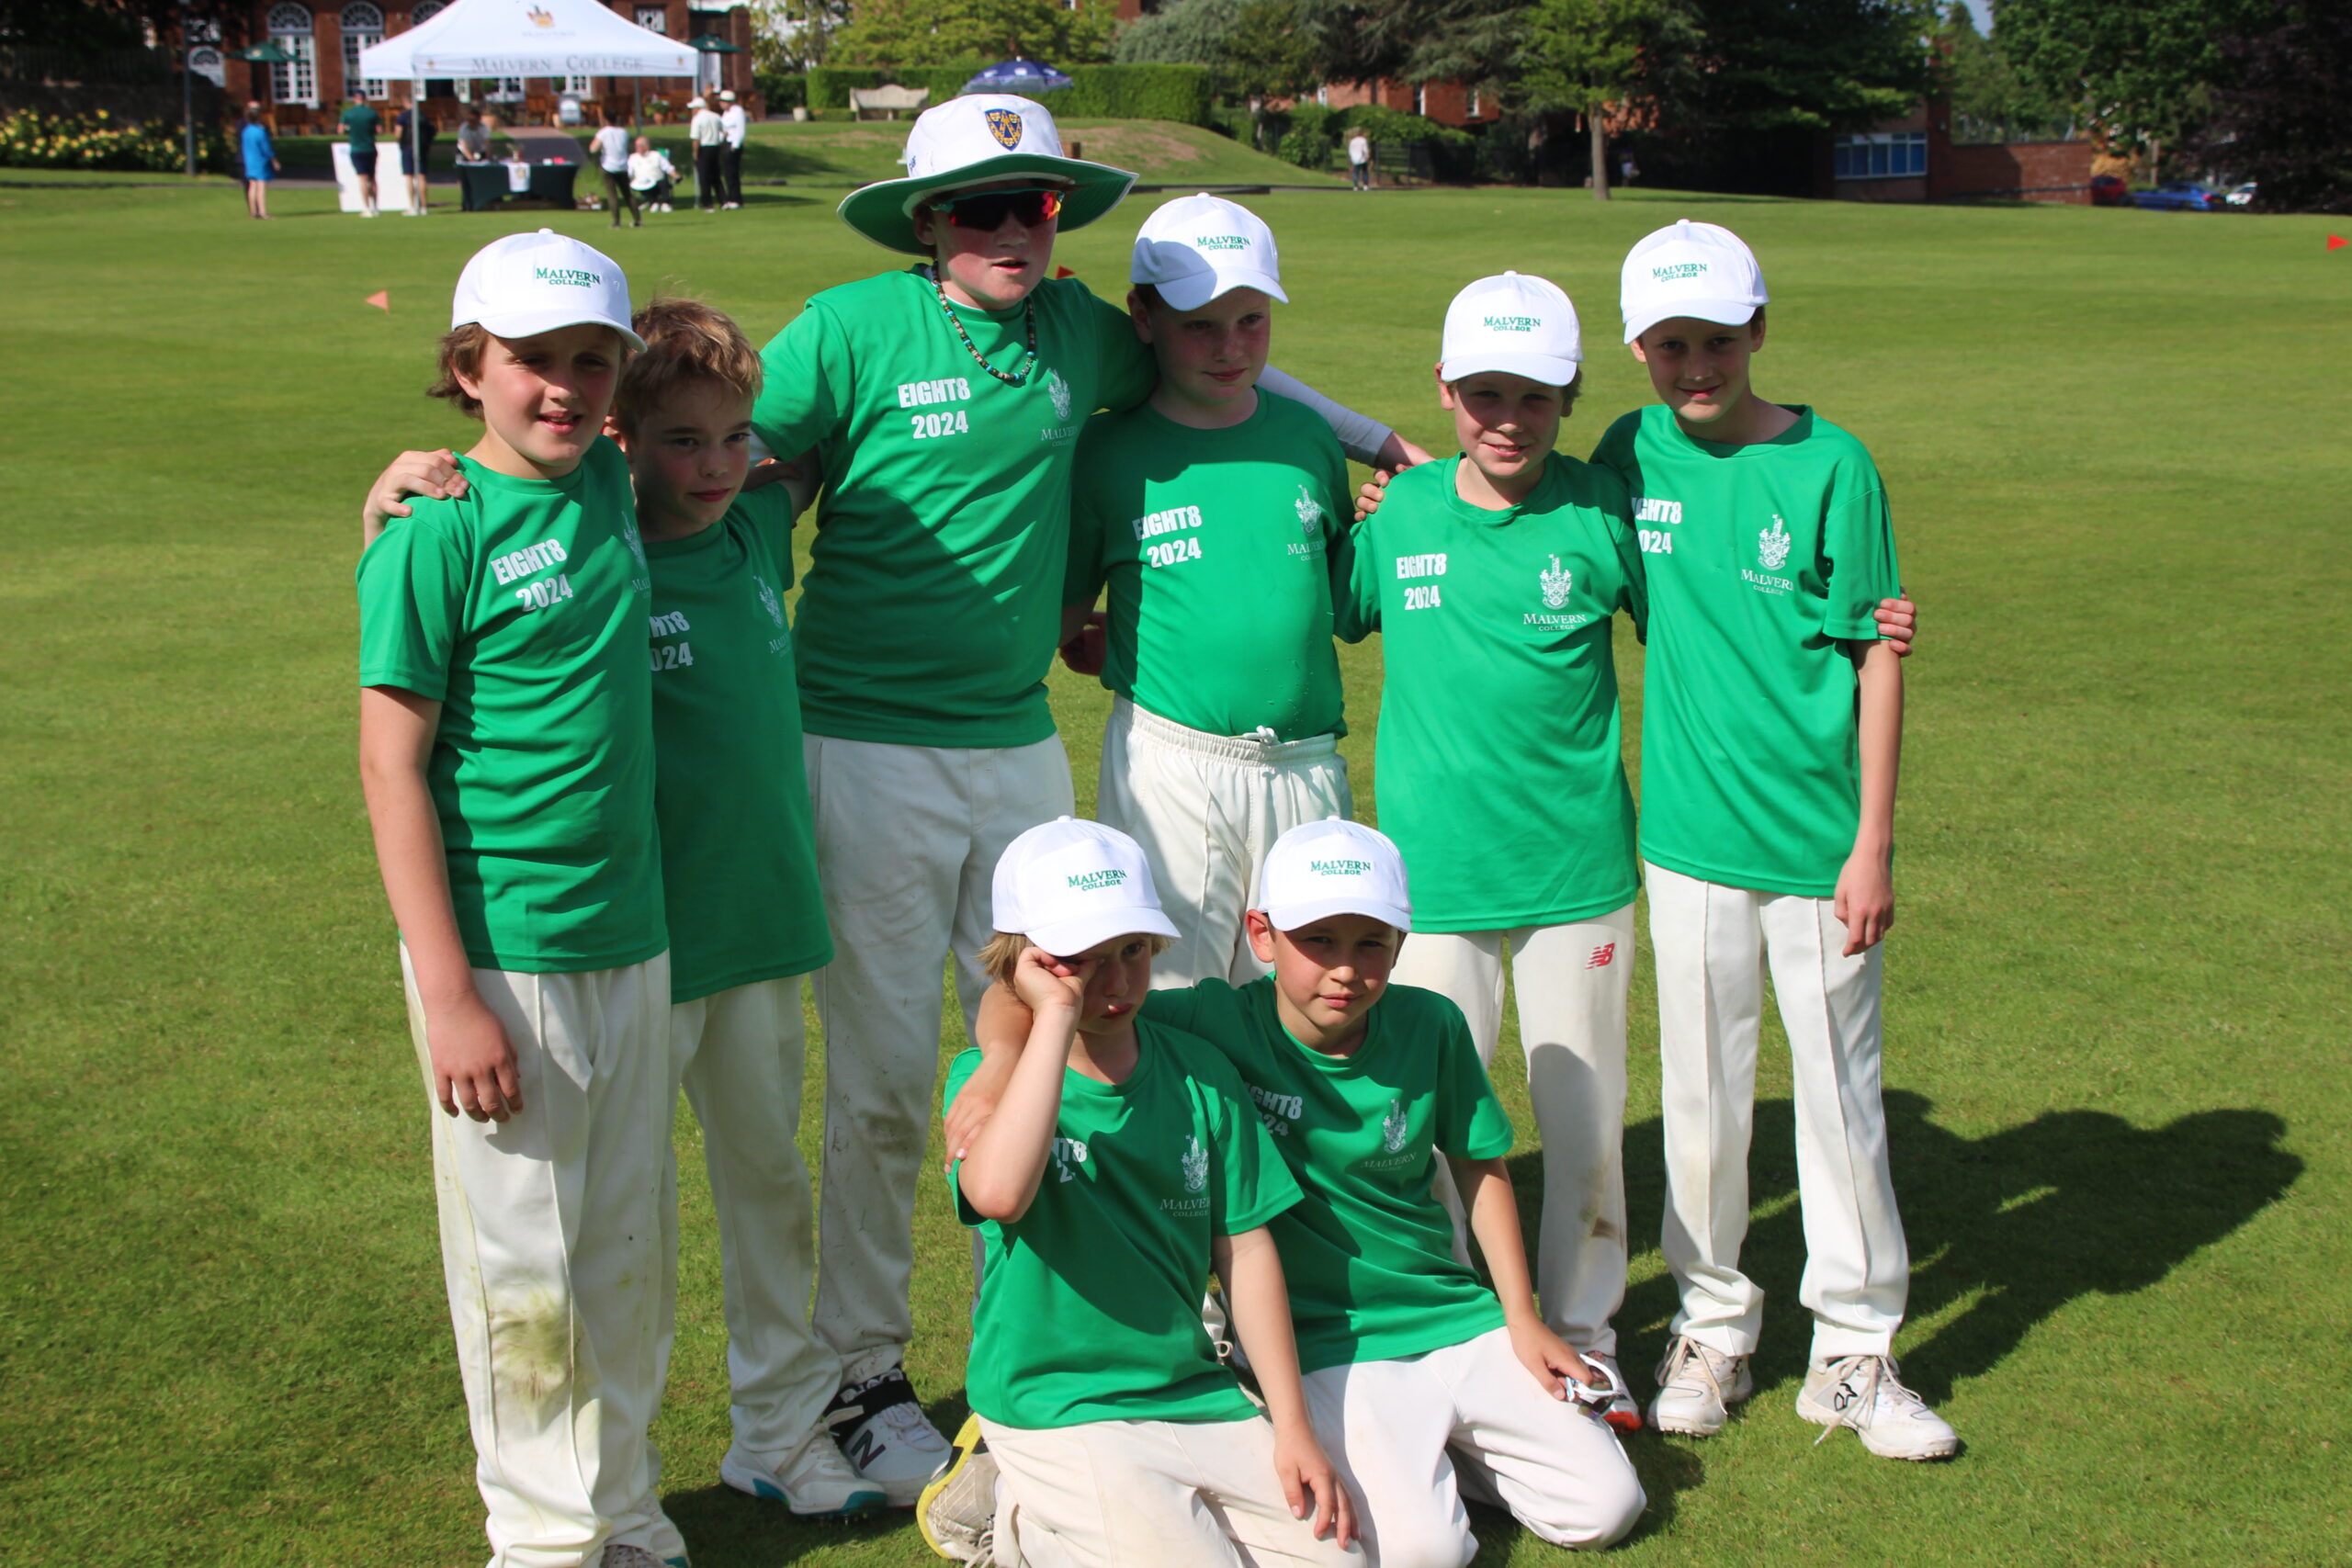 Team of eight Packwood cricketers in bright green tops